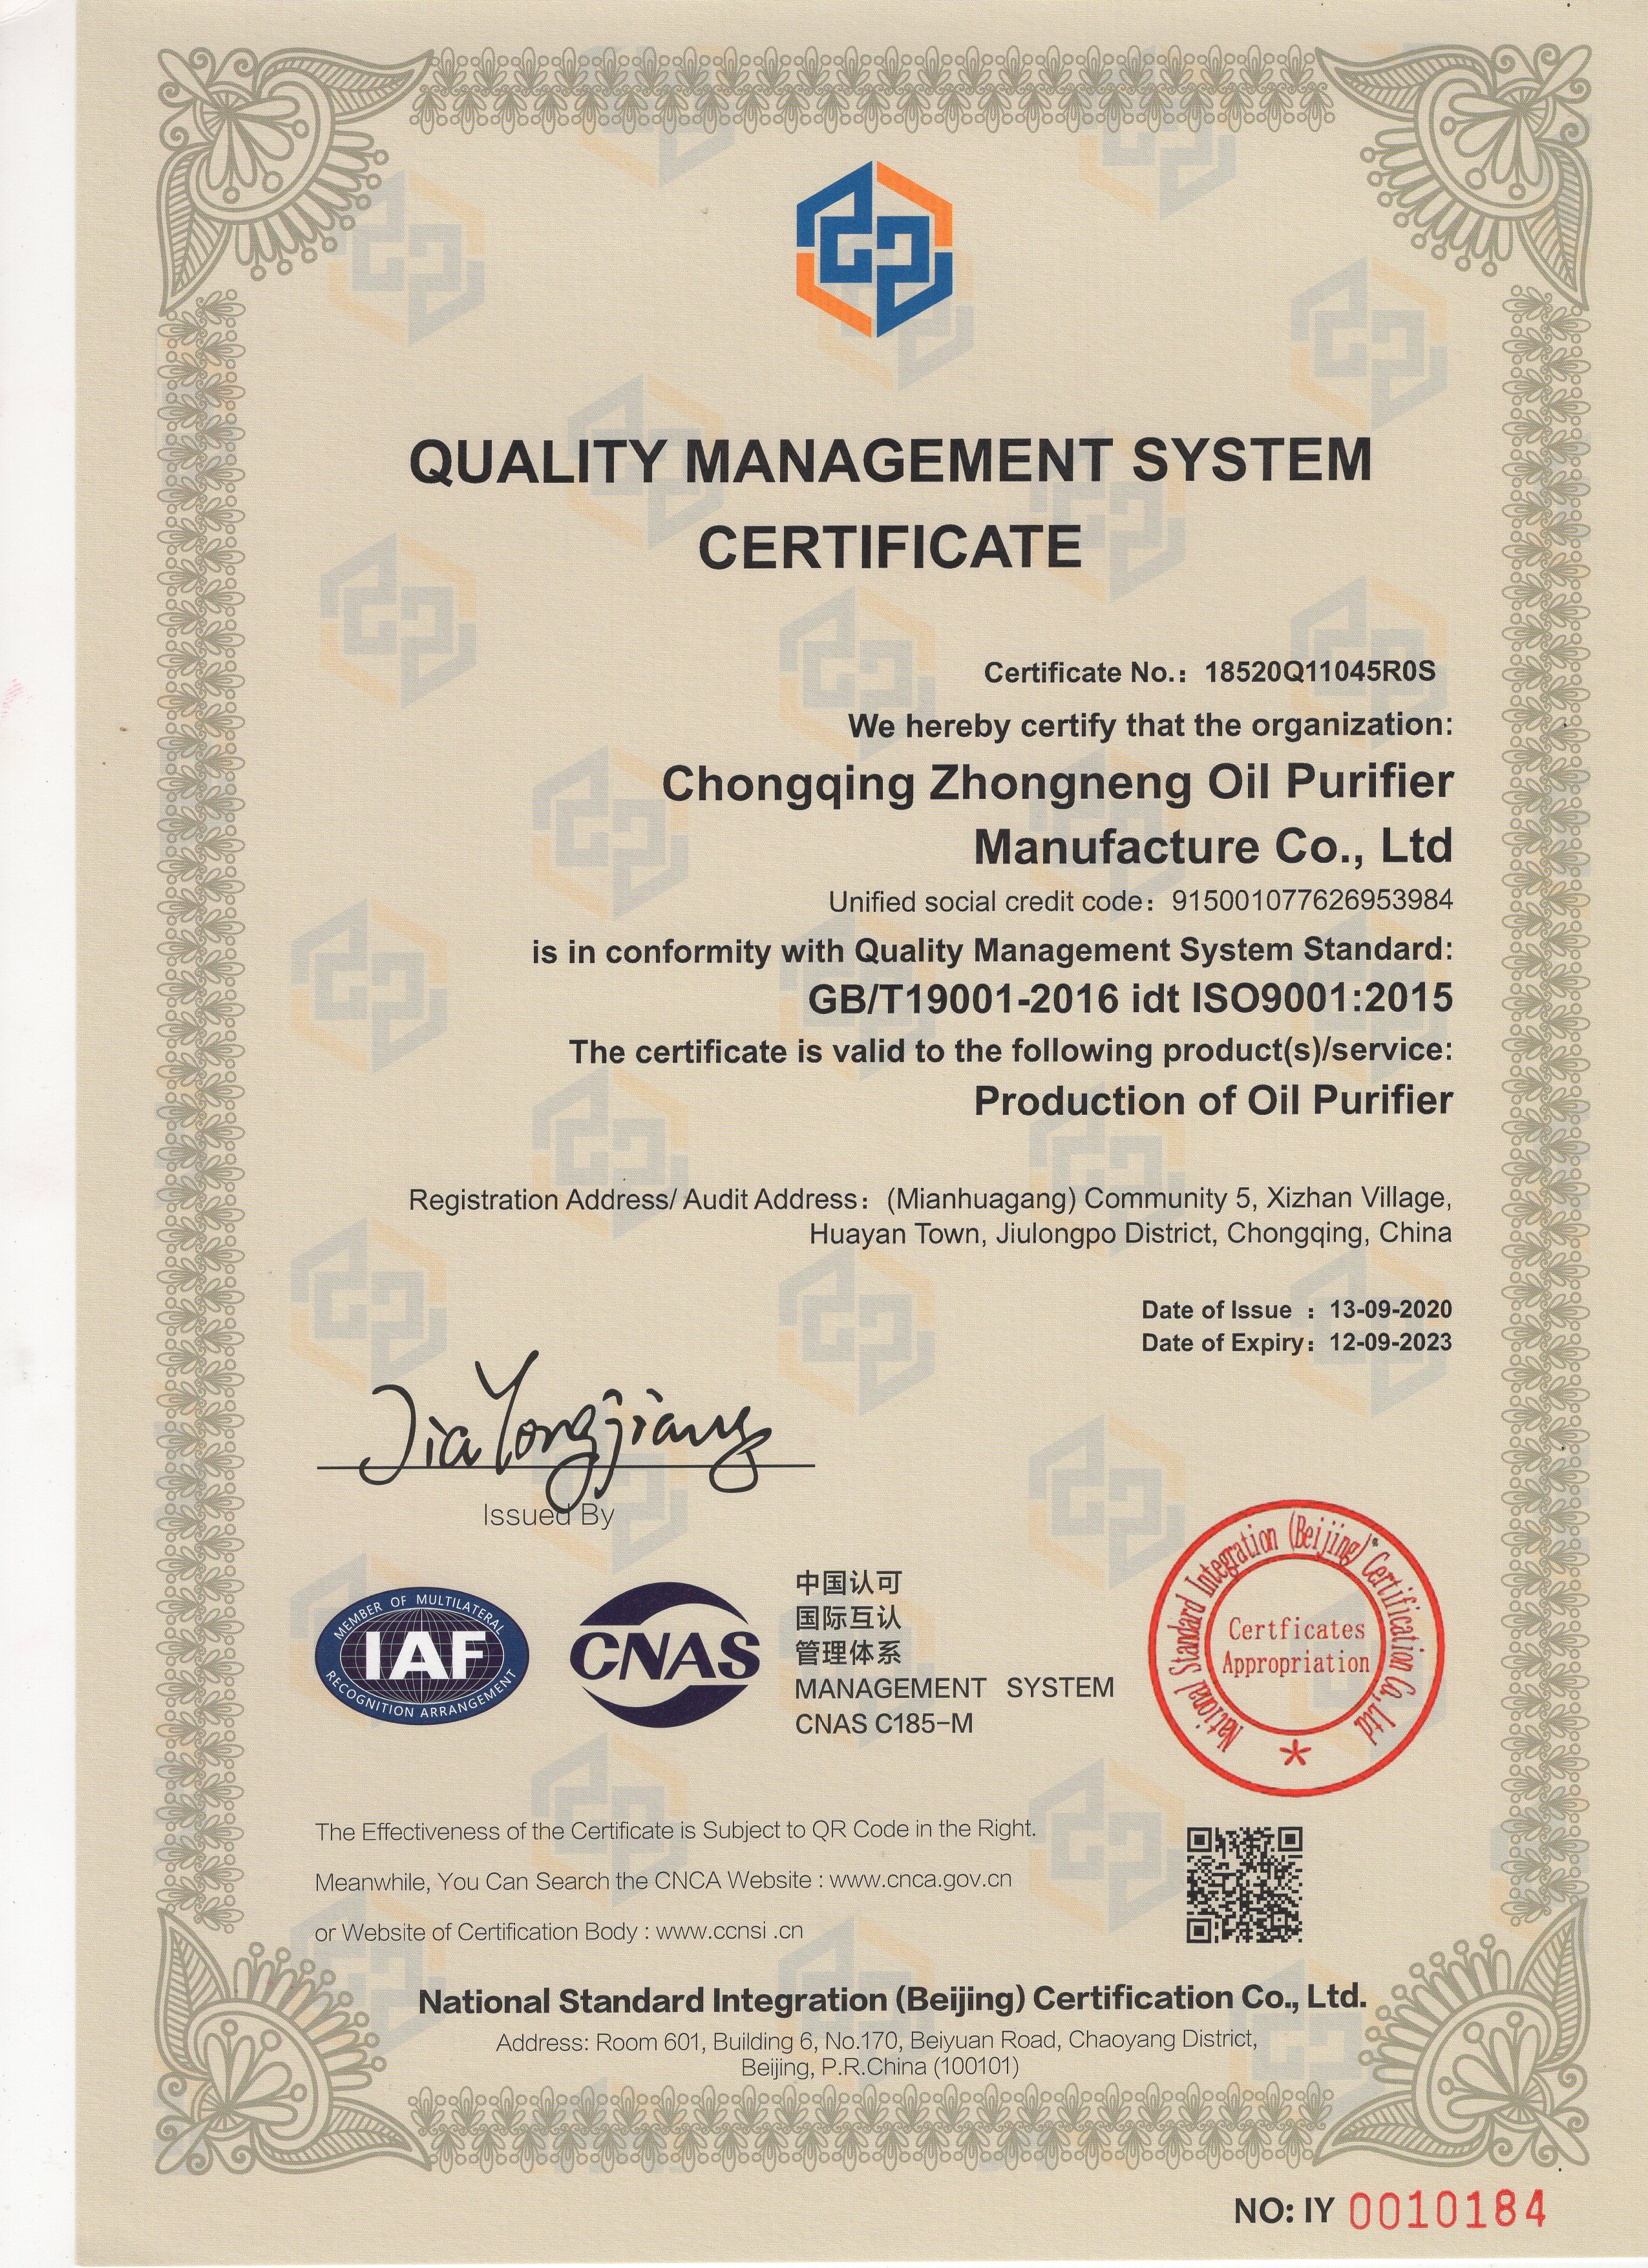 We Get the ISO9001: 2015 Certificate